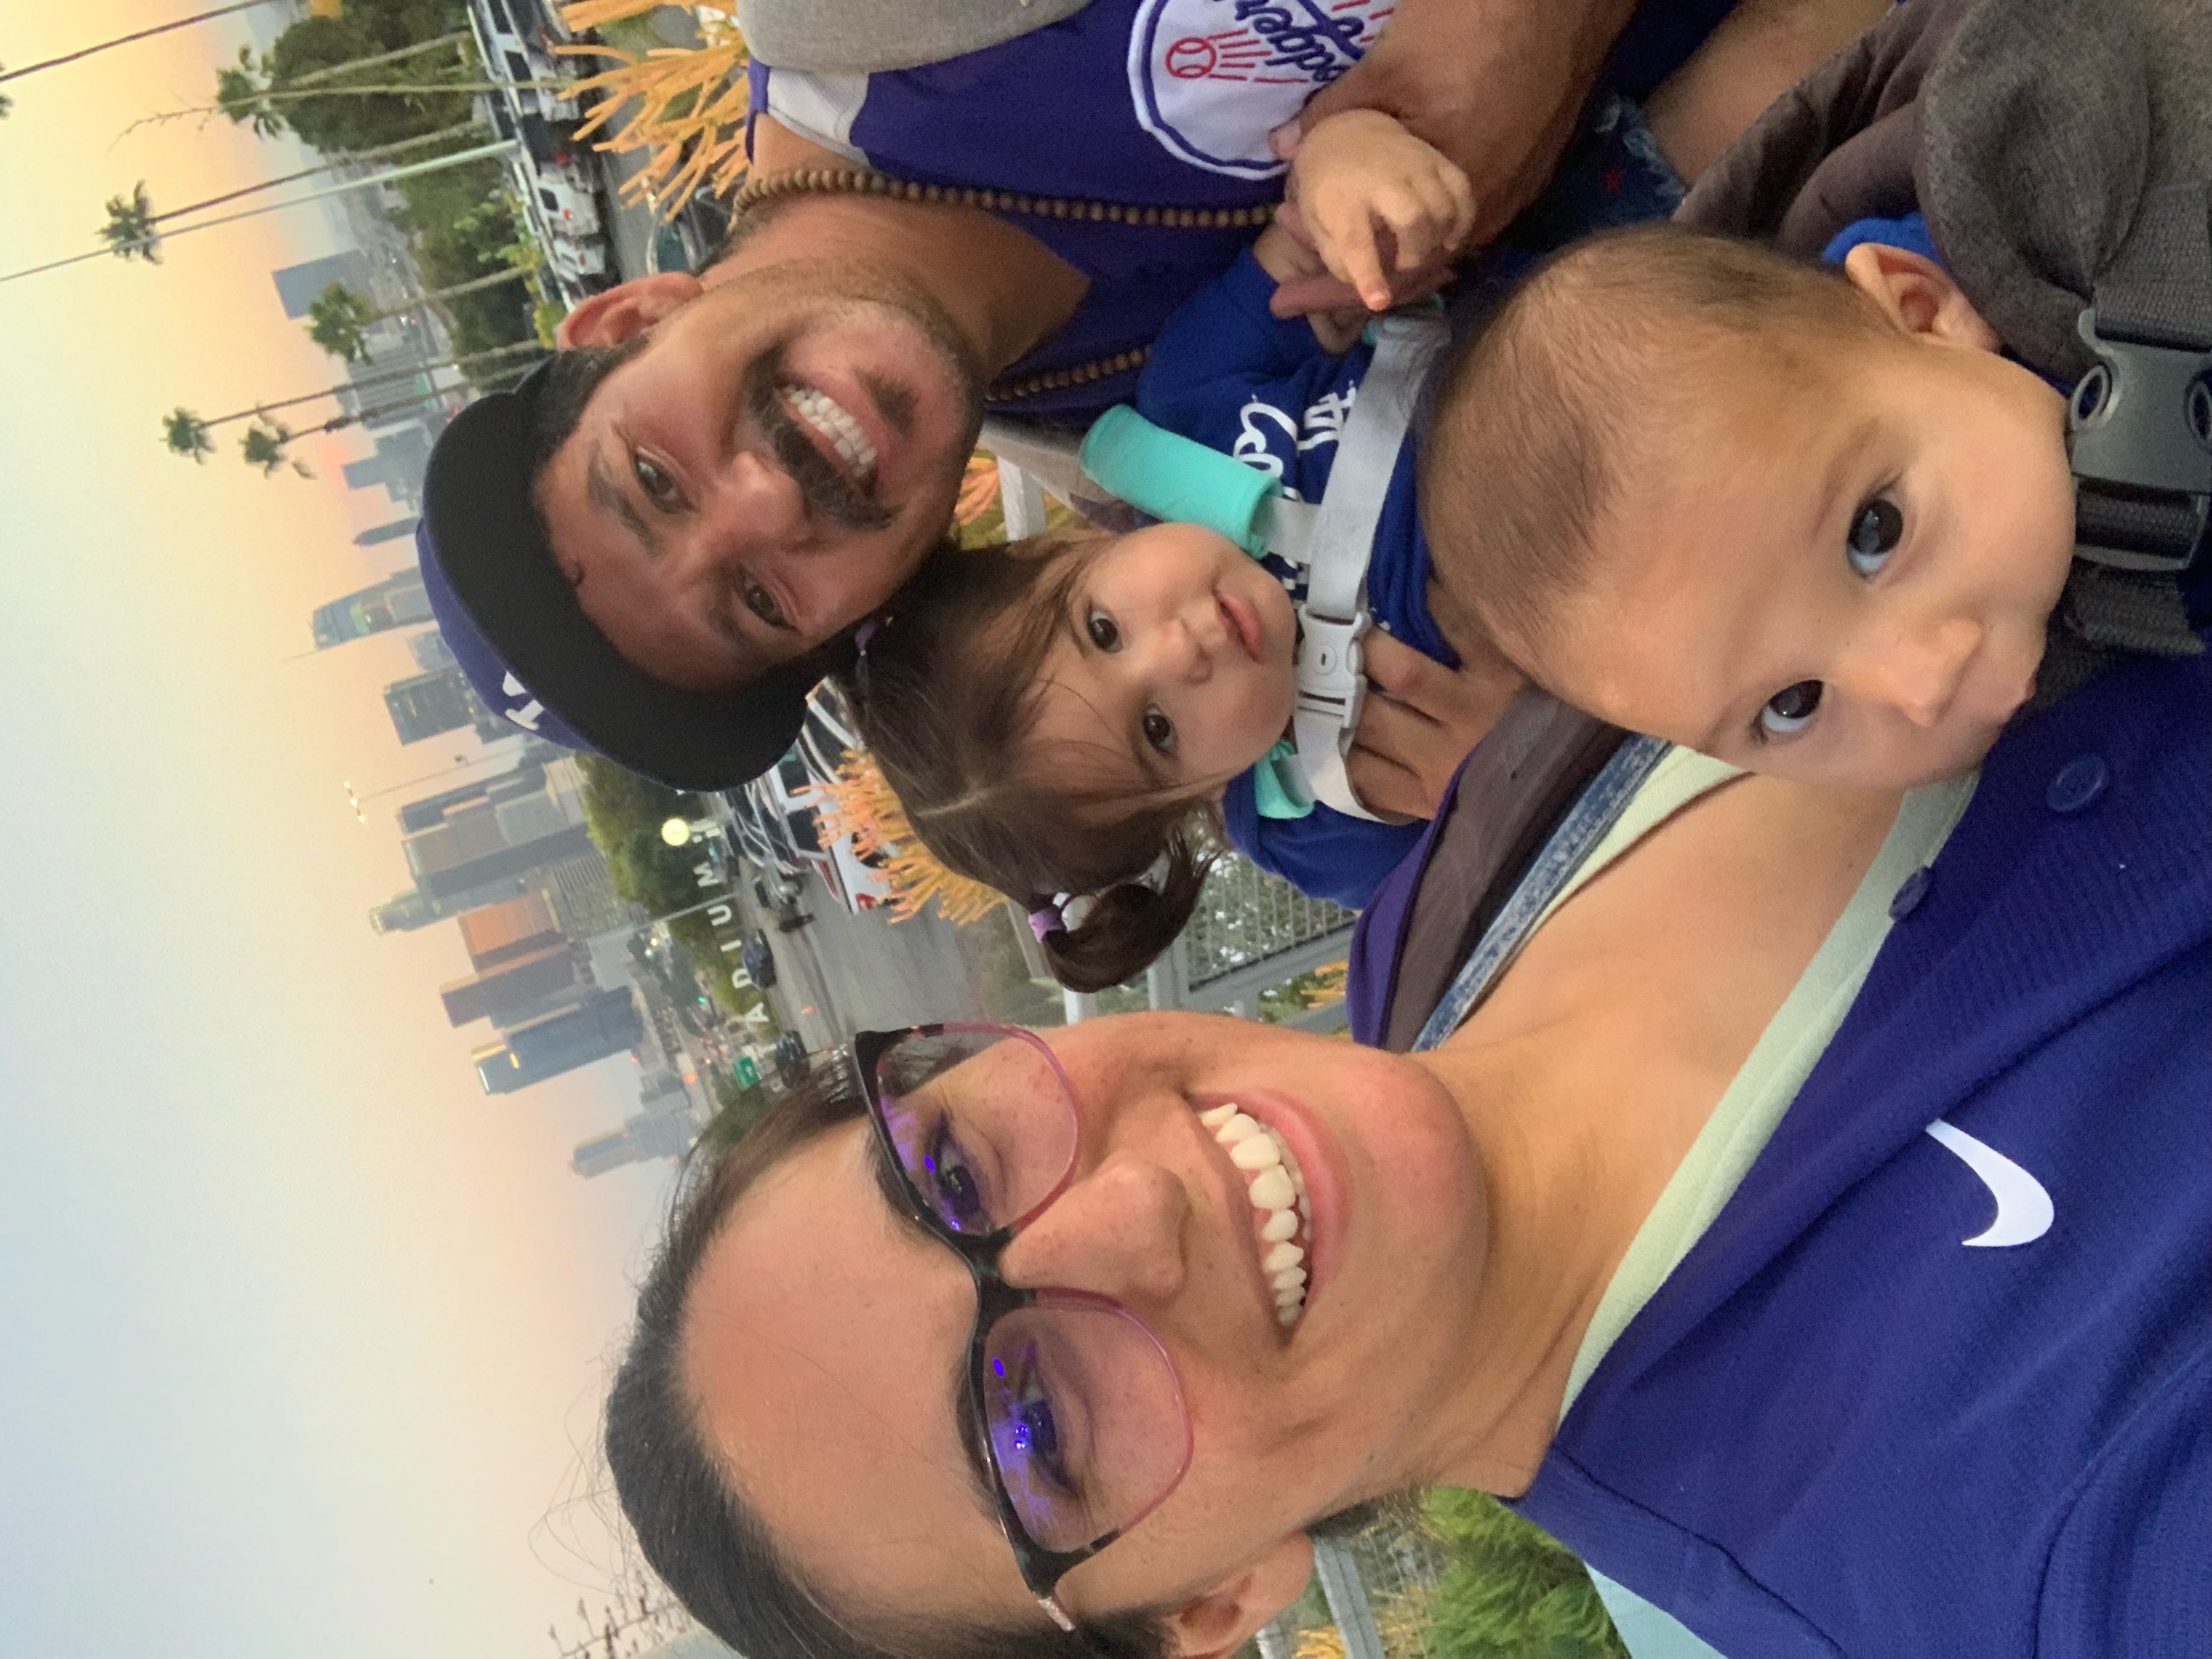 Nohemi Tena and Family at Dodger Game